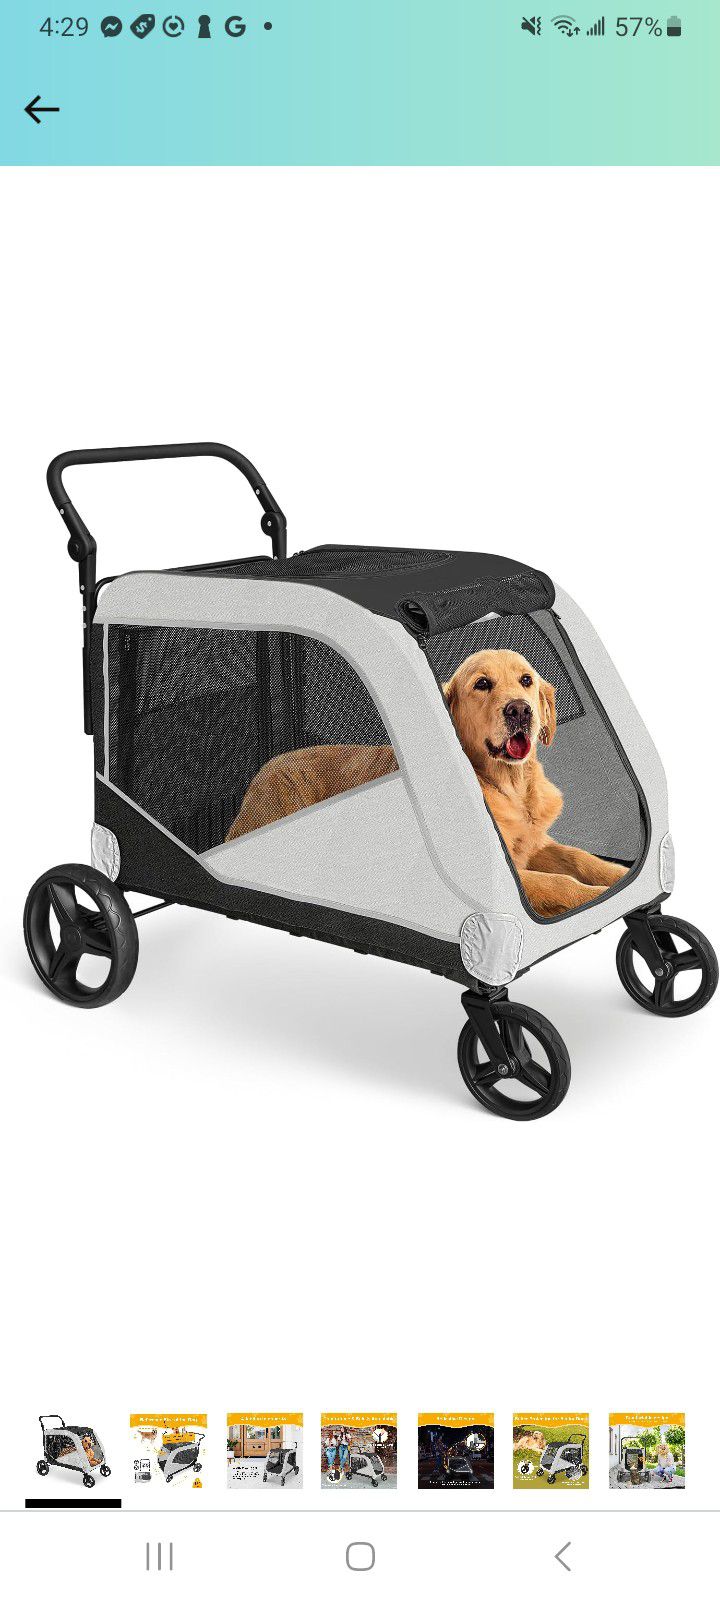 Extra Large Dog Stroller for Large Dogs,Pet Stroller for Medium Dogs 30/40/ 50 lbs, Dog Carts with 4 Wheels,Adjustable Handle & Breathable Mesh